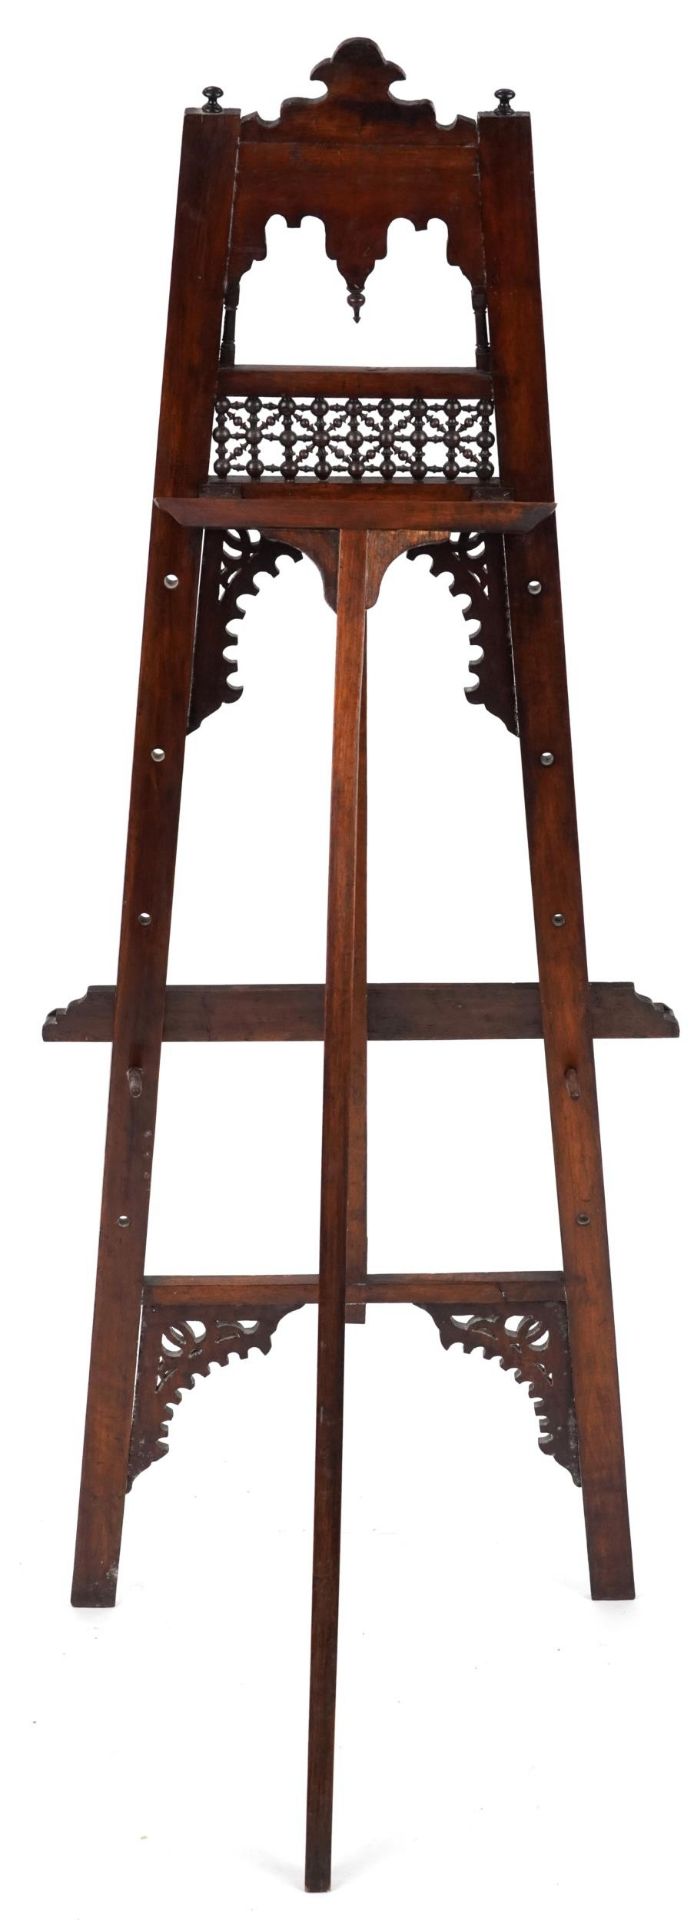 Attributed to Liberty & So, Moorish hardwood floor standing easel with mother of pearl inlay - Image 3 of 3